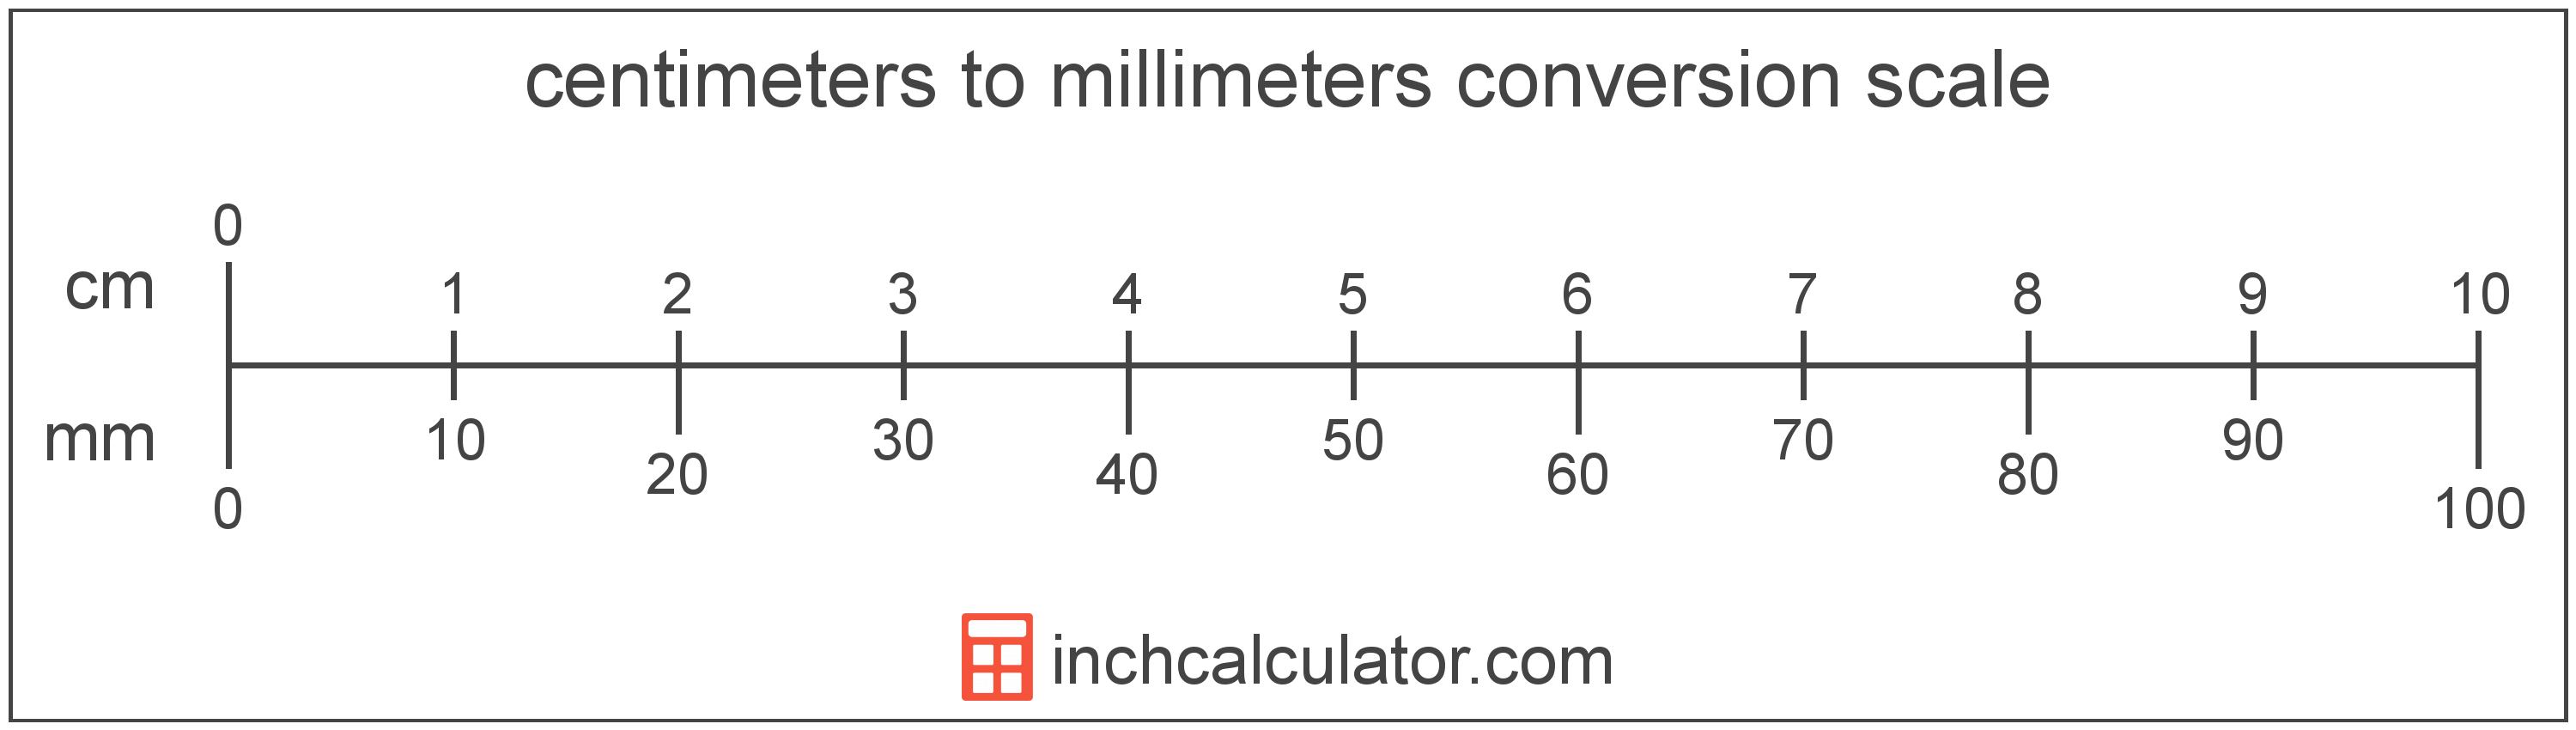 millimeters-to-centimeters-conversion-mm-to-cm